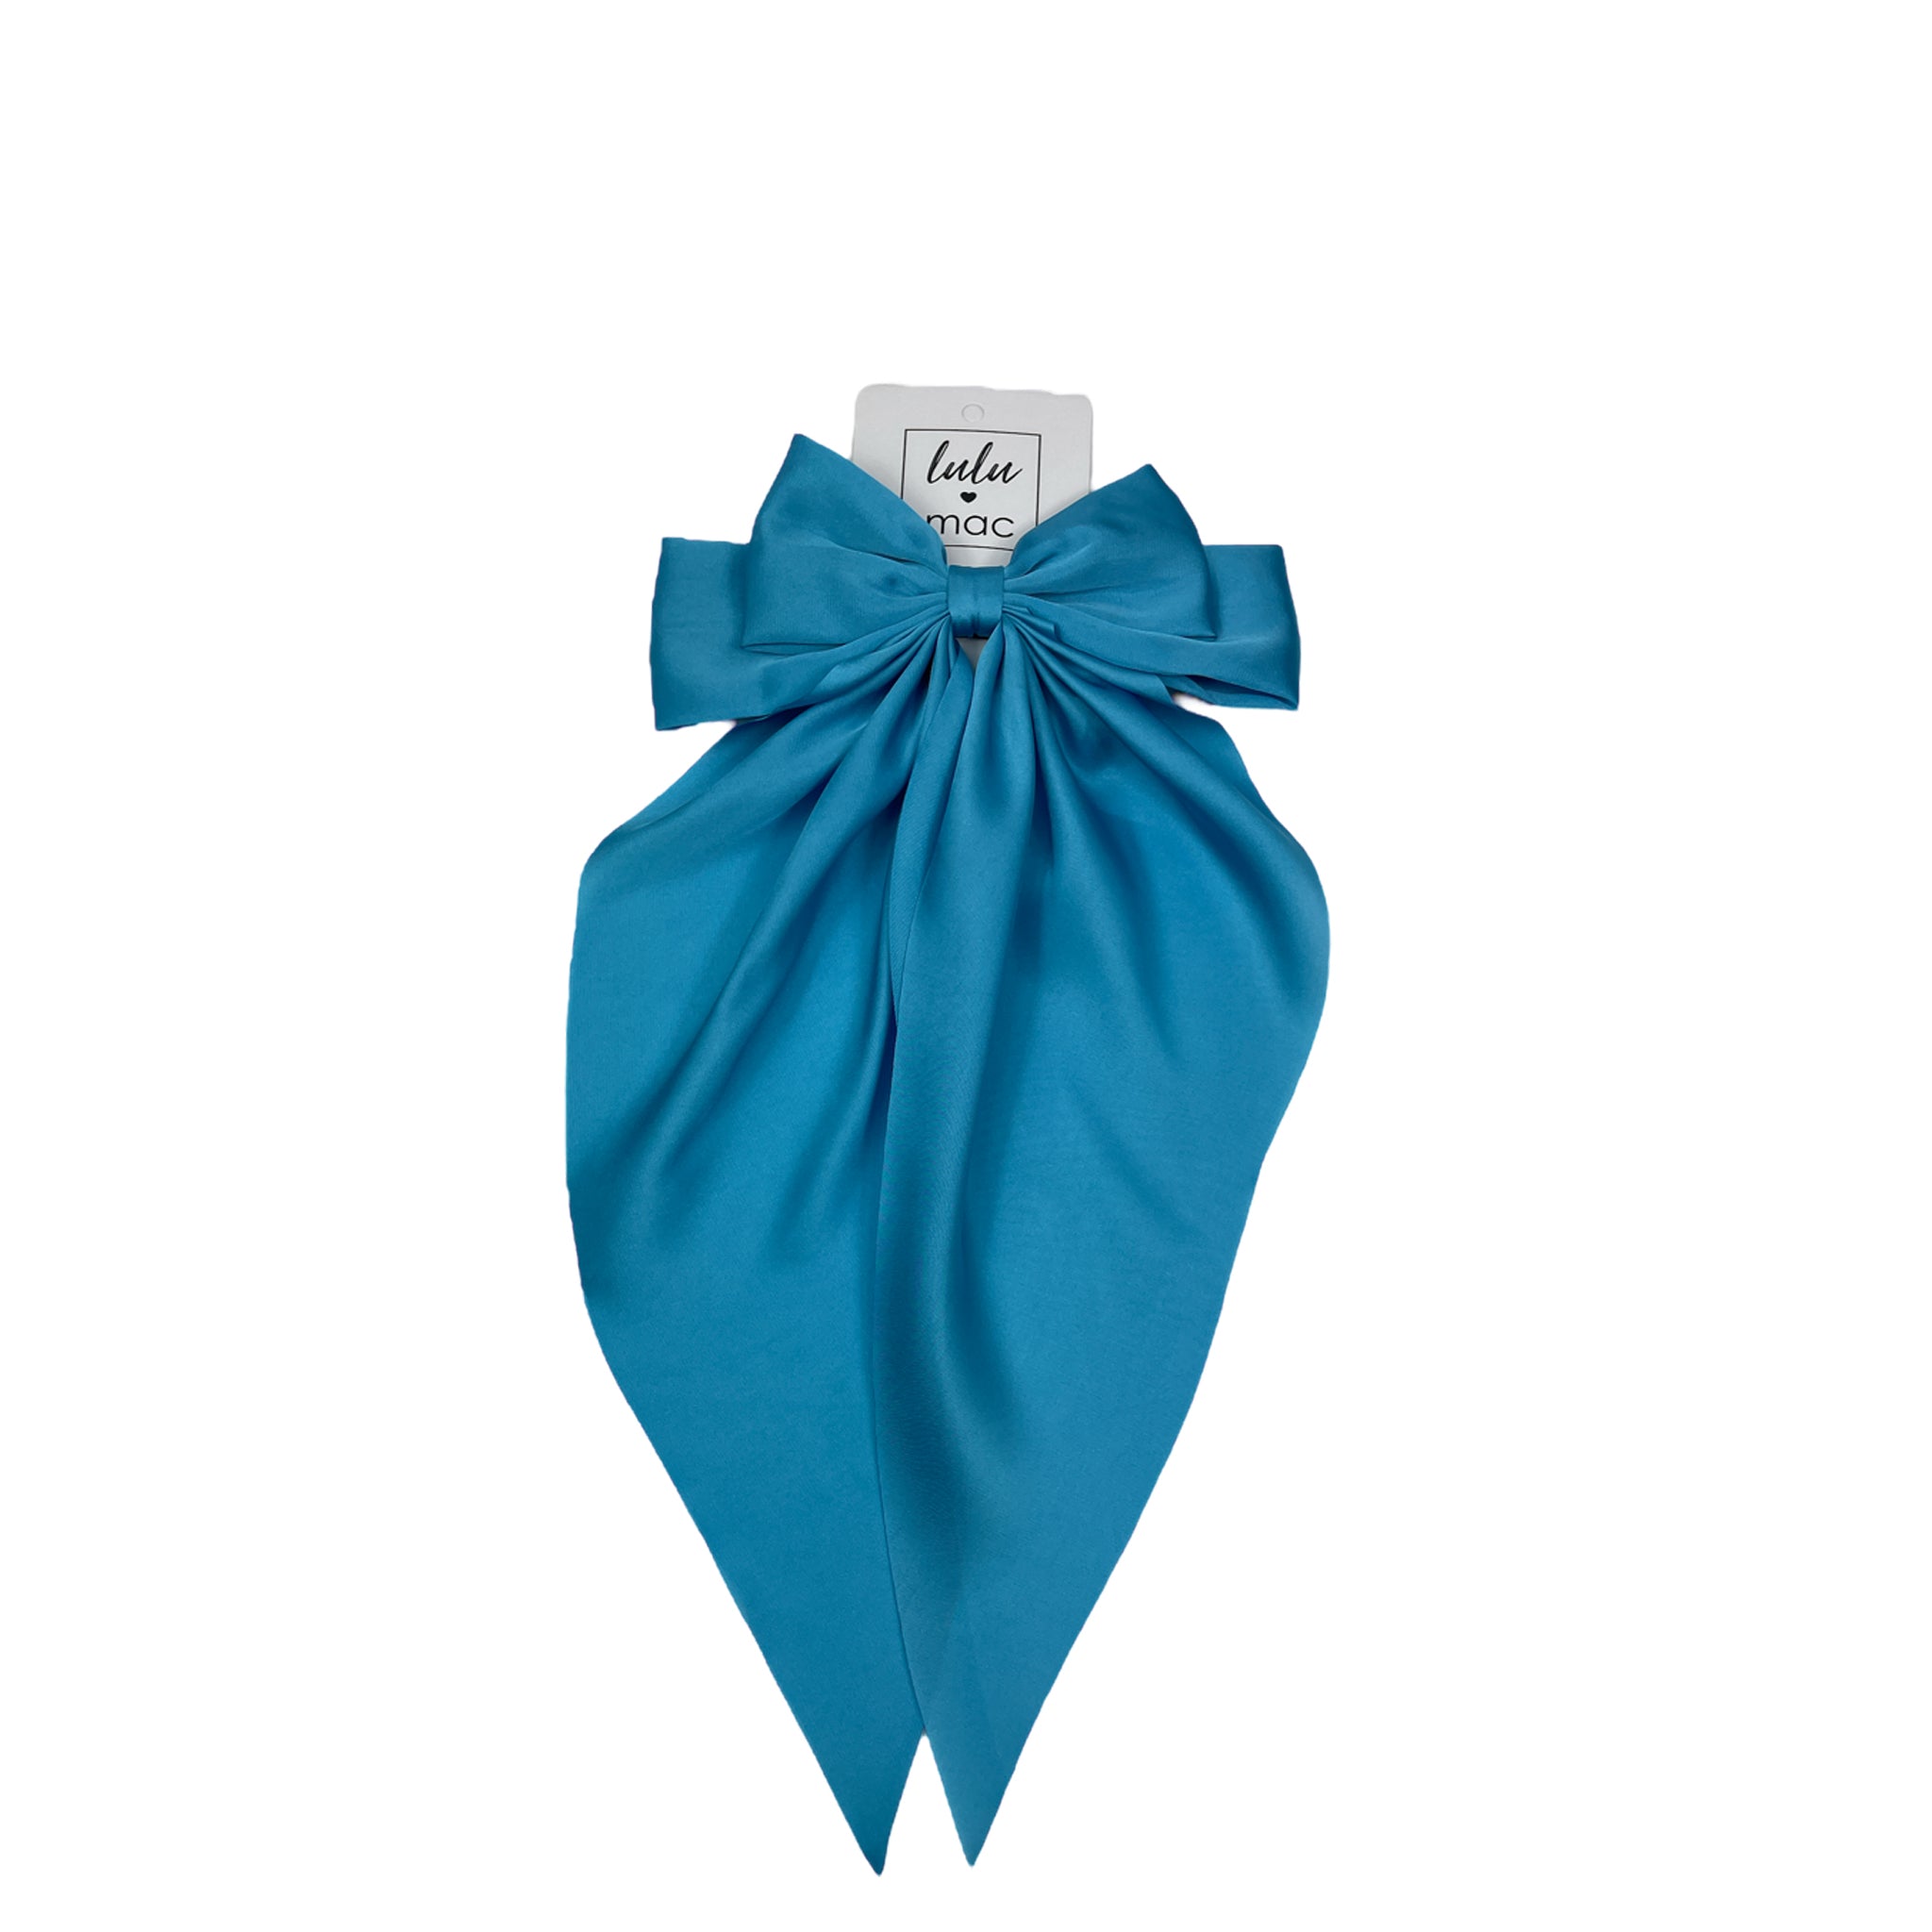 DDL-2270 Large Satin Bow Turquoise